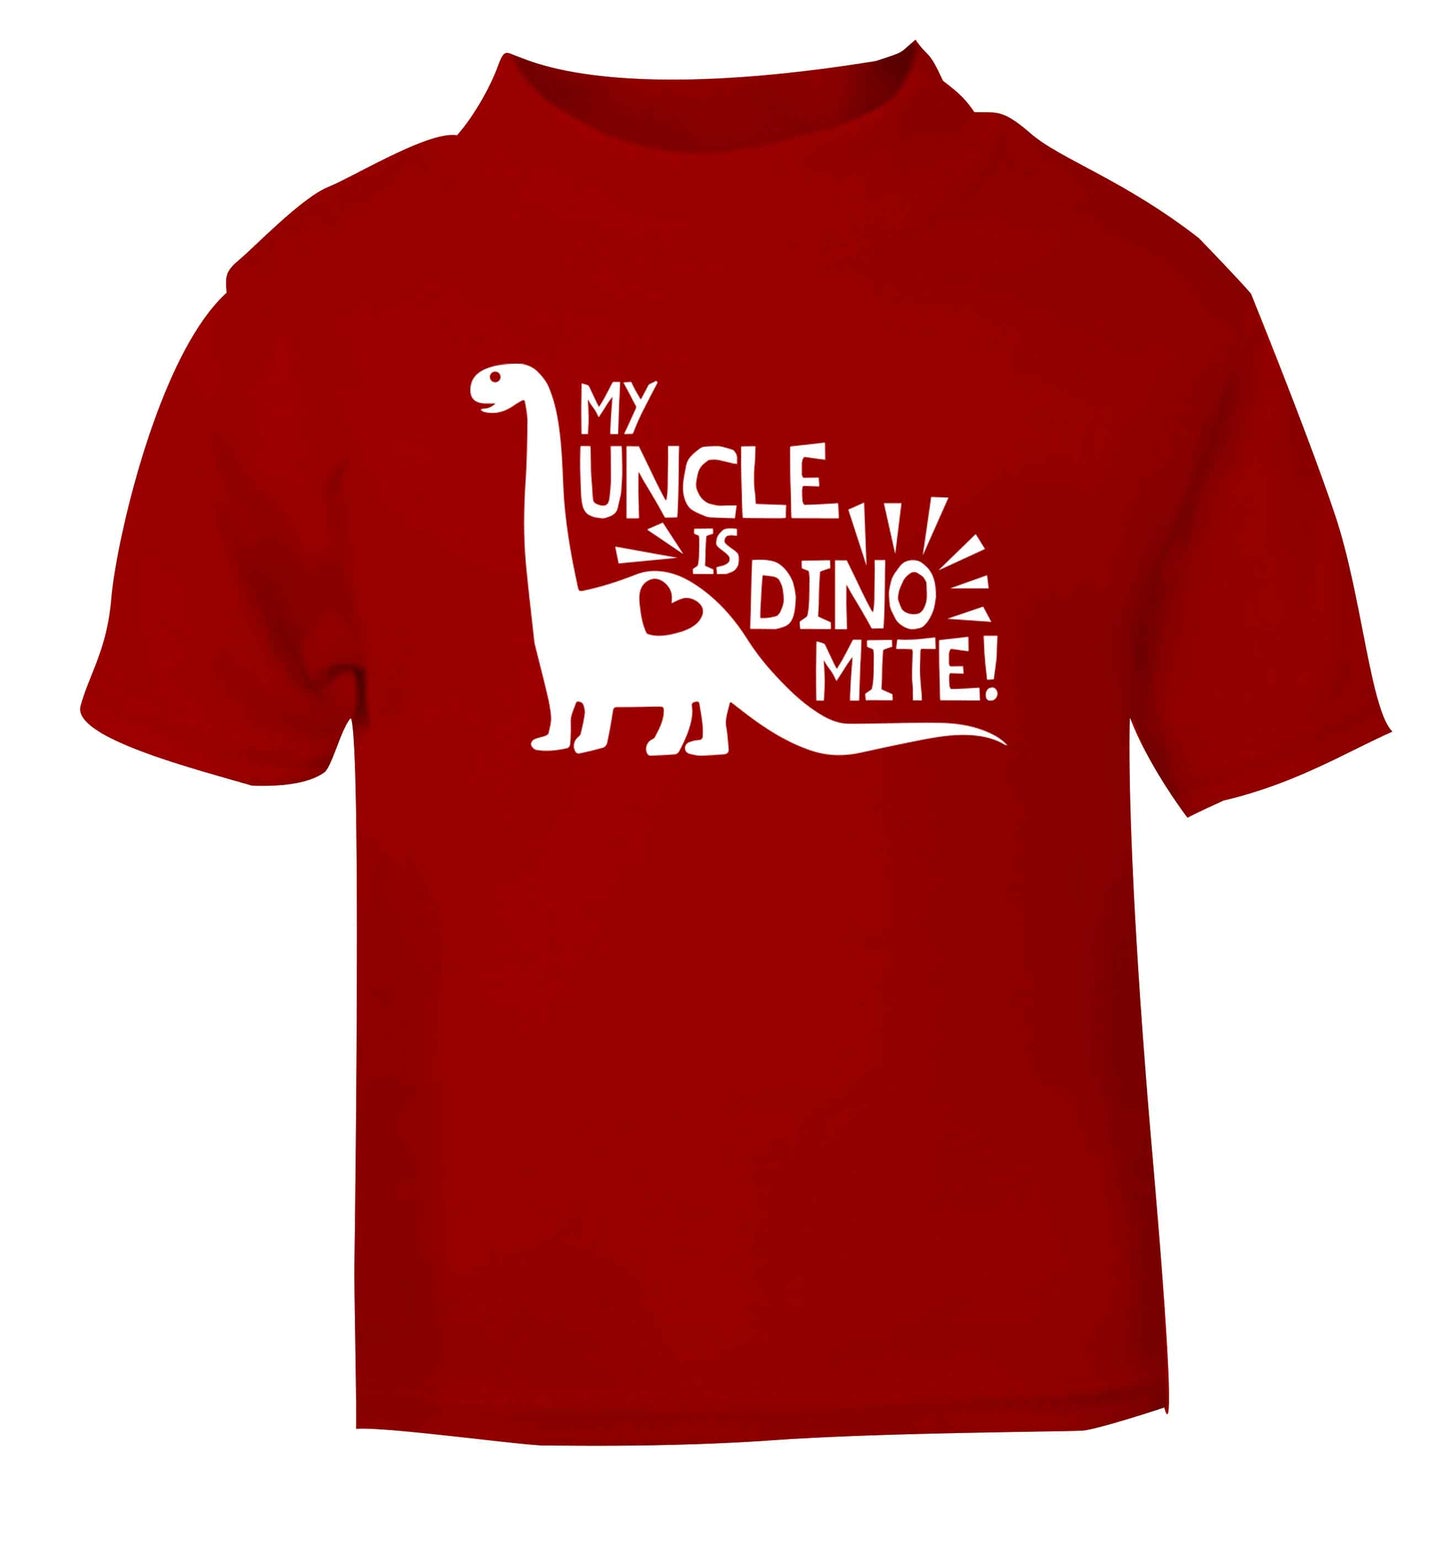 My uncle is dinomite! red Baby Toddler Tshirt 2 Years